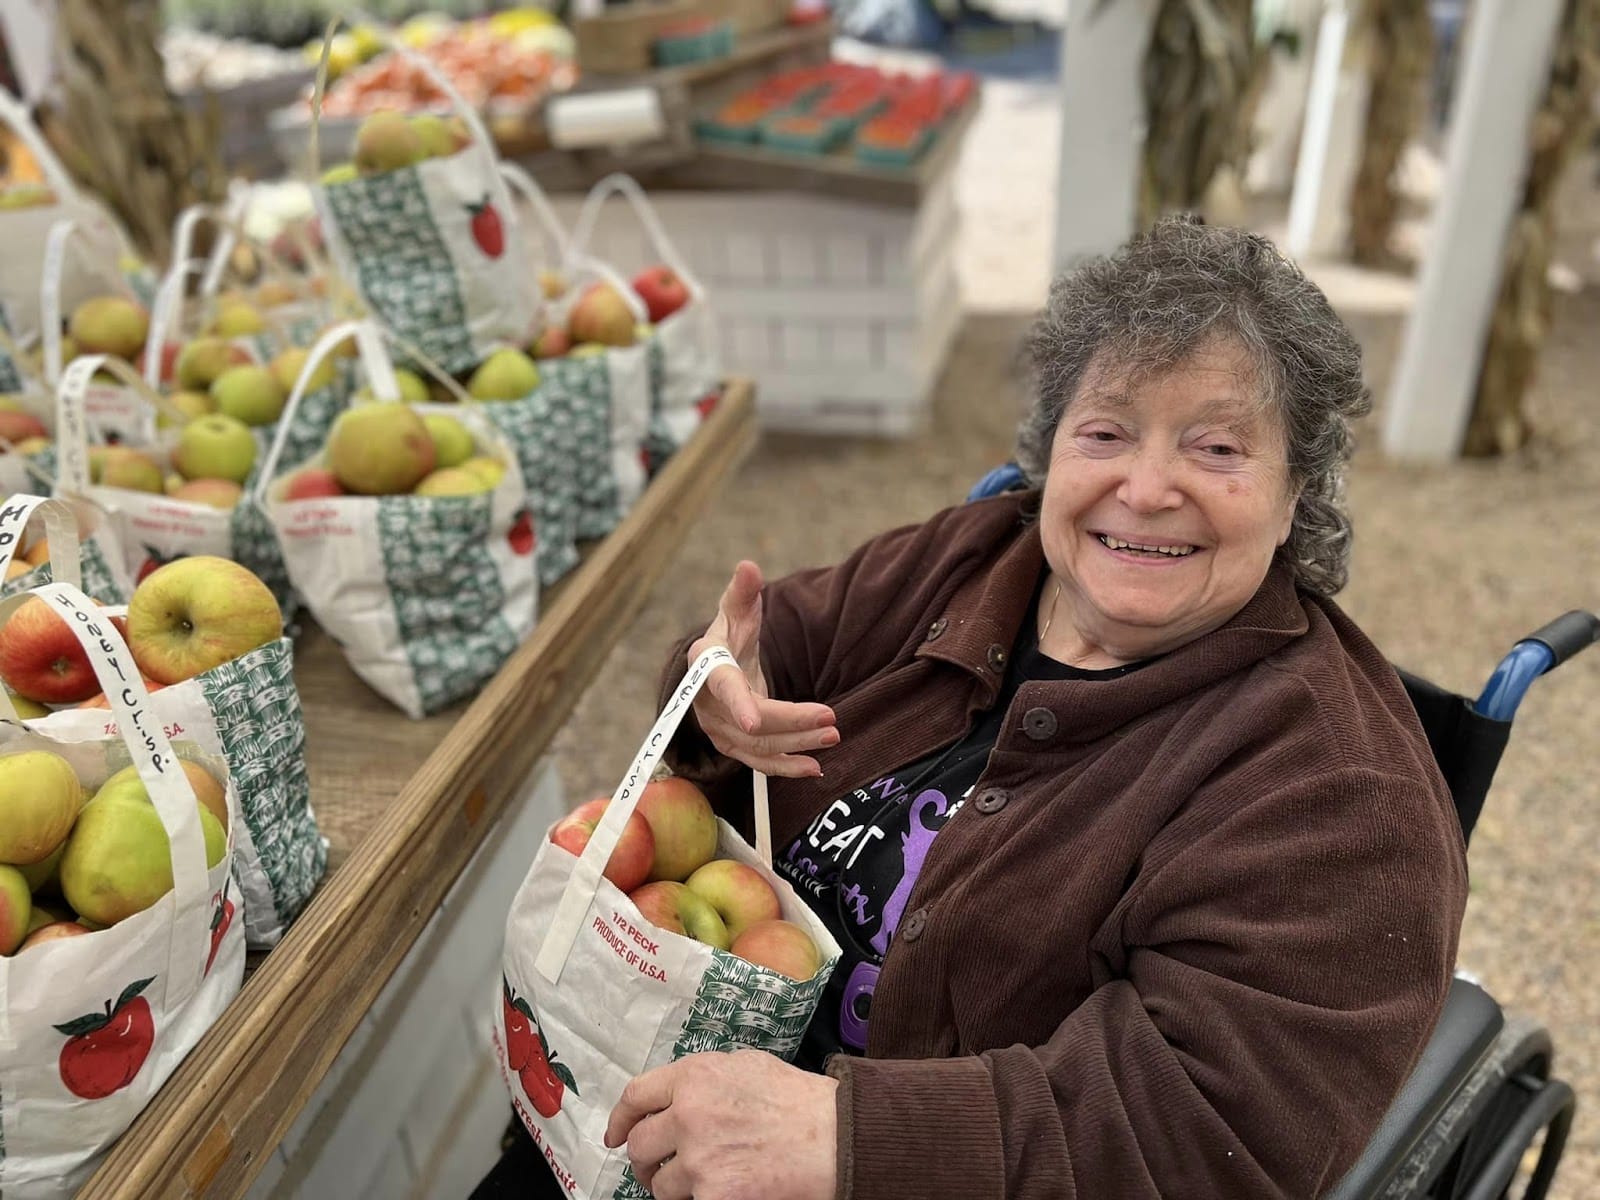 An elderly woman in a wheelchair, smiling with a bushel of apples